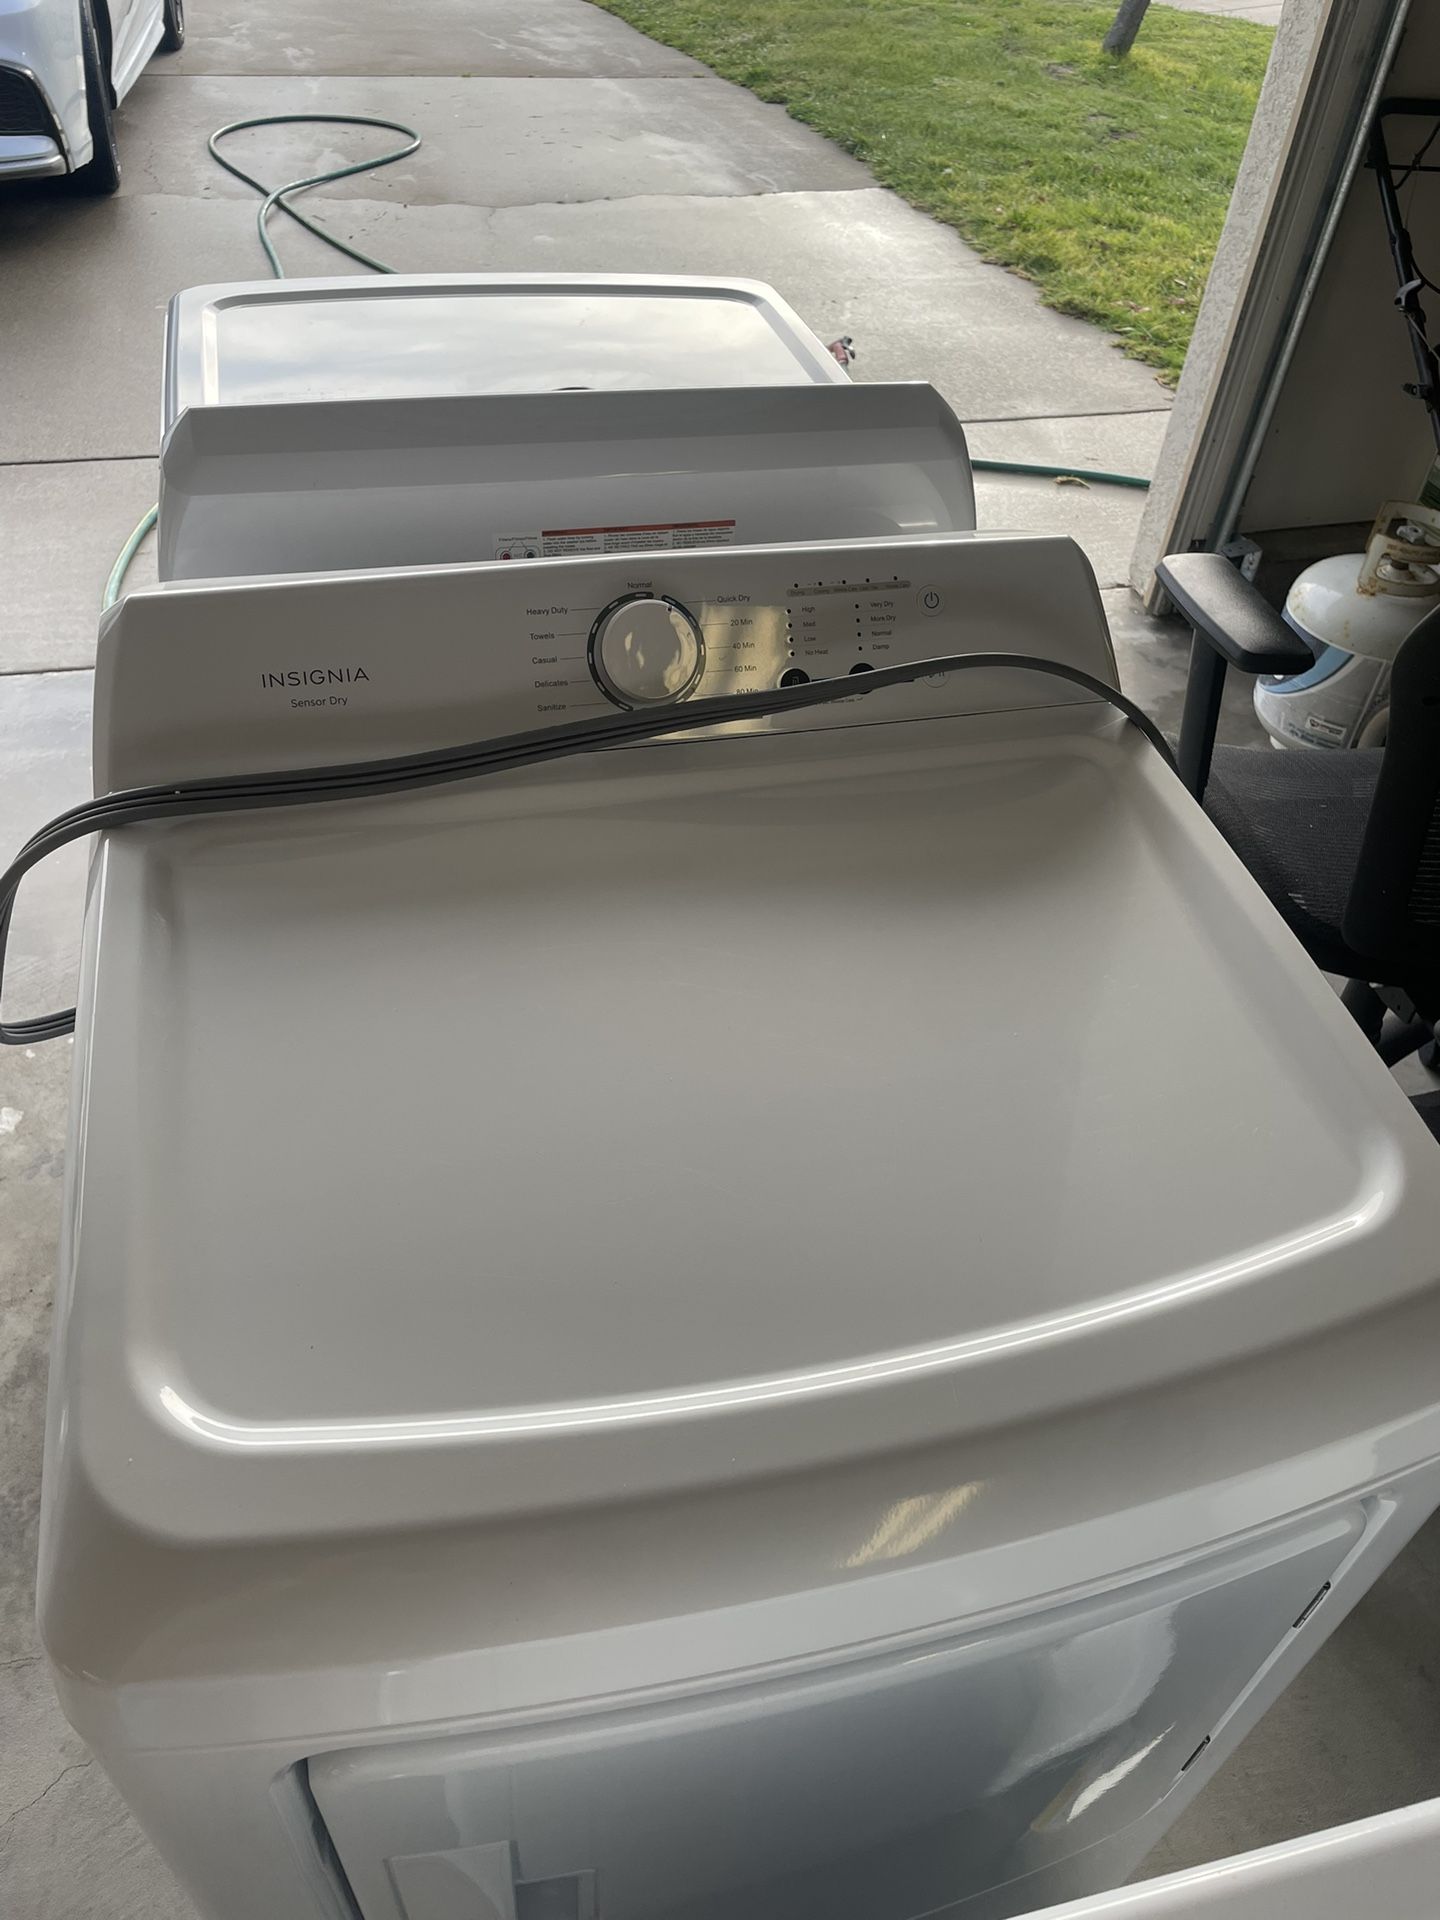 Washer/Dryer Electric